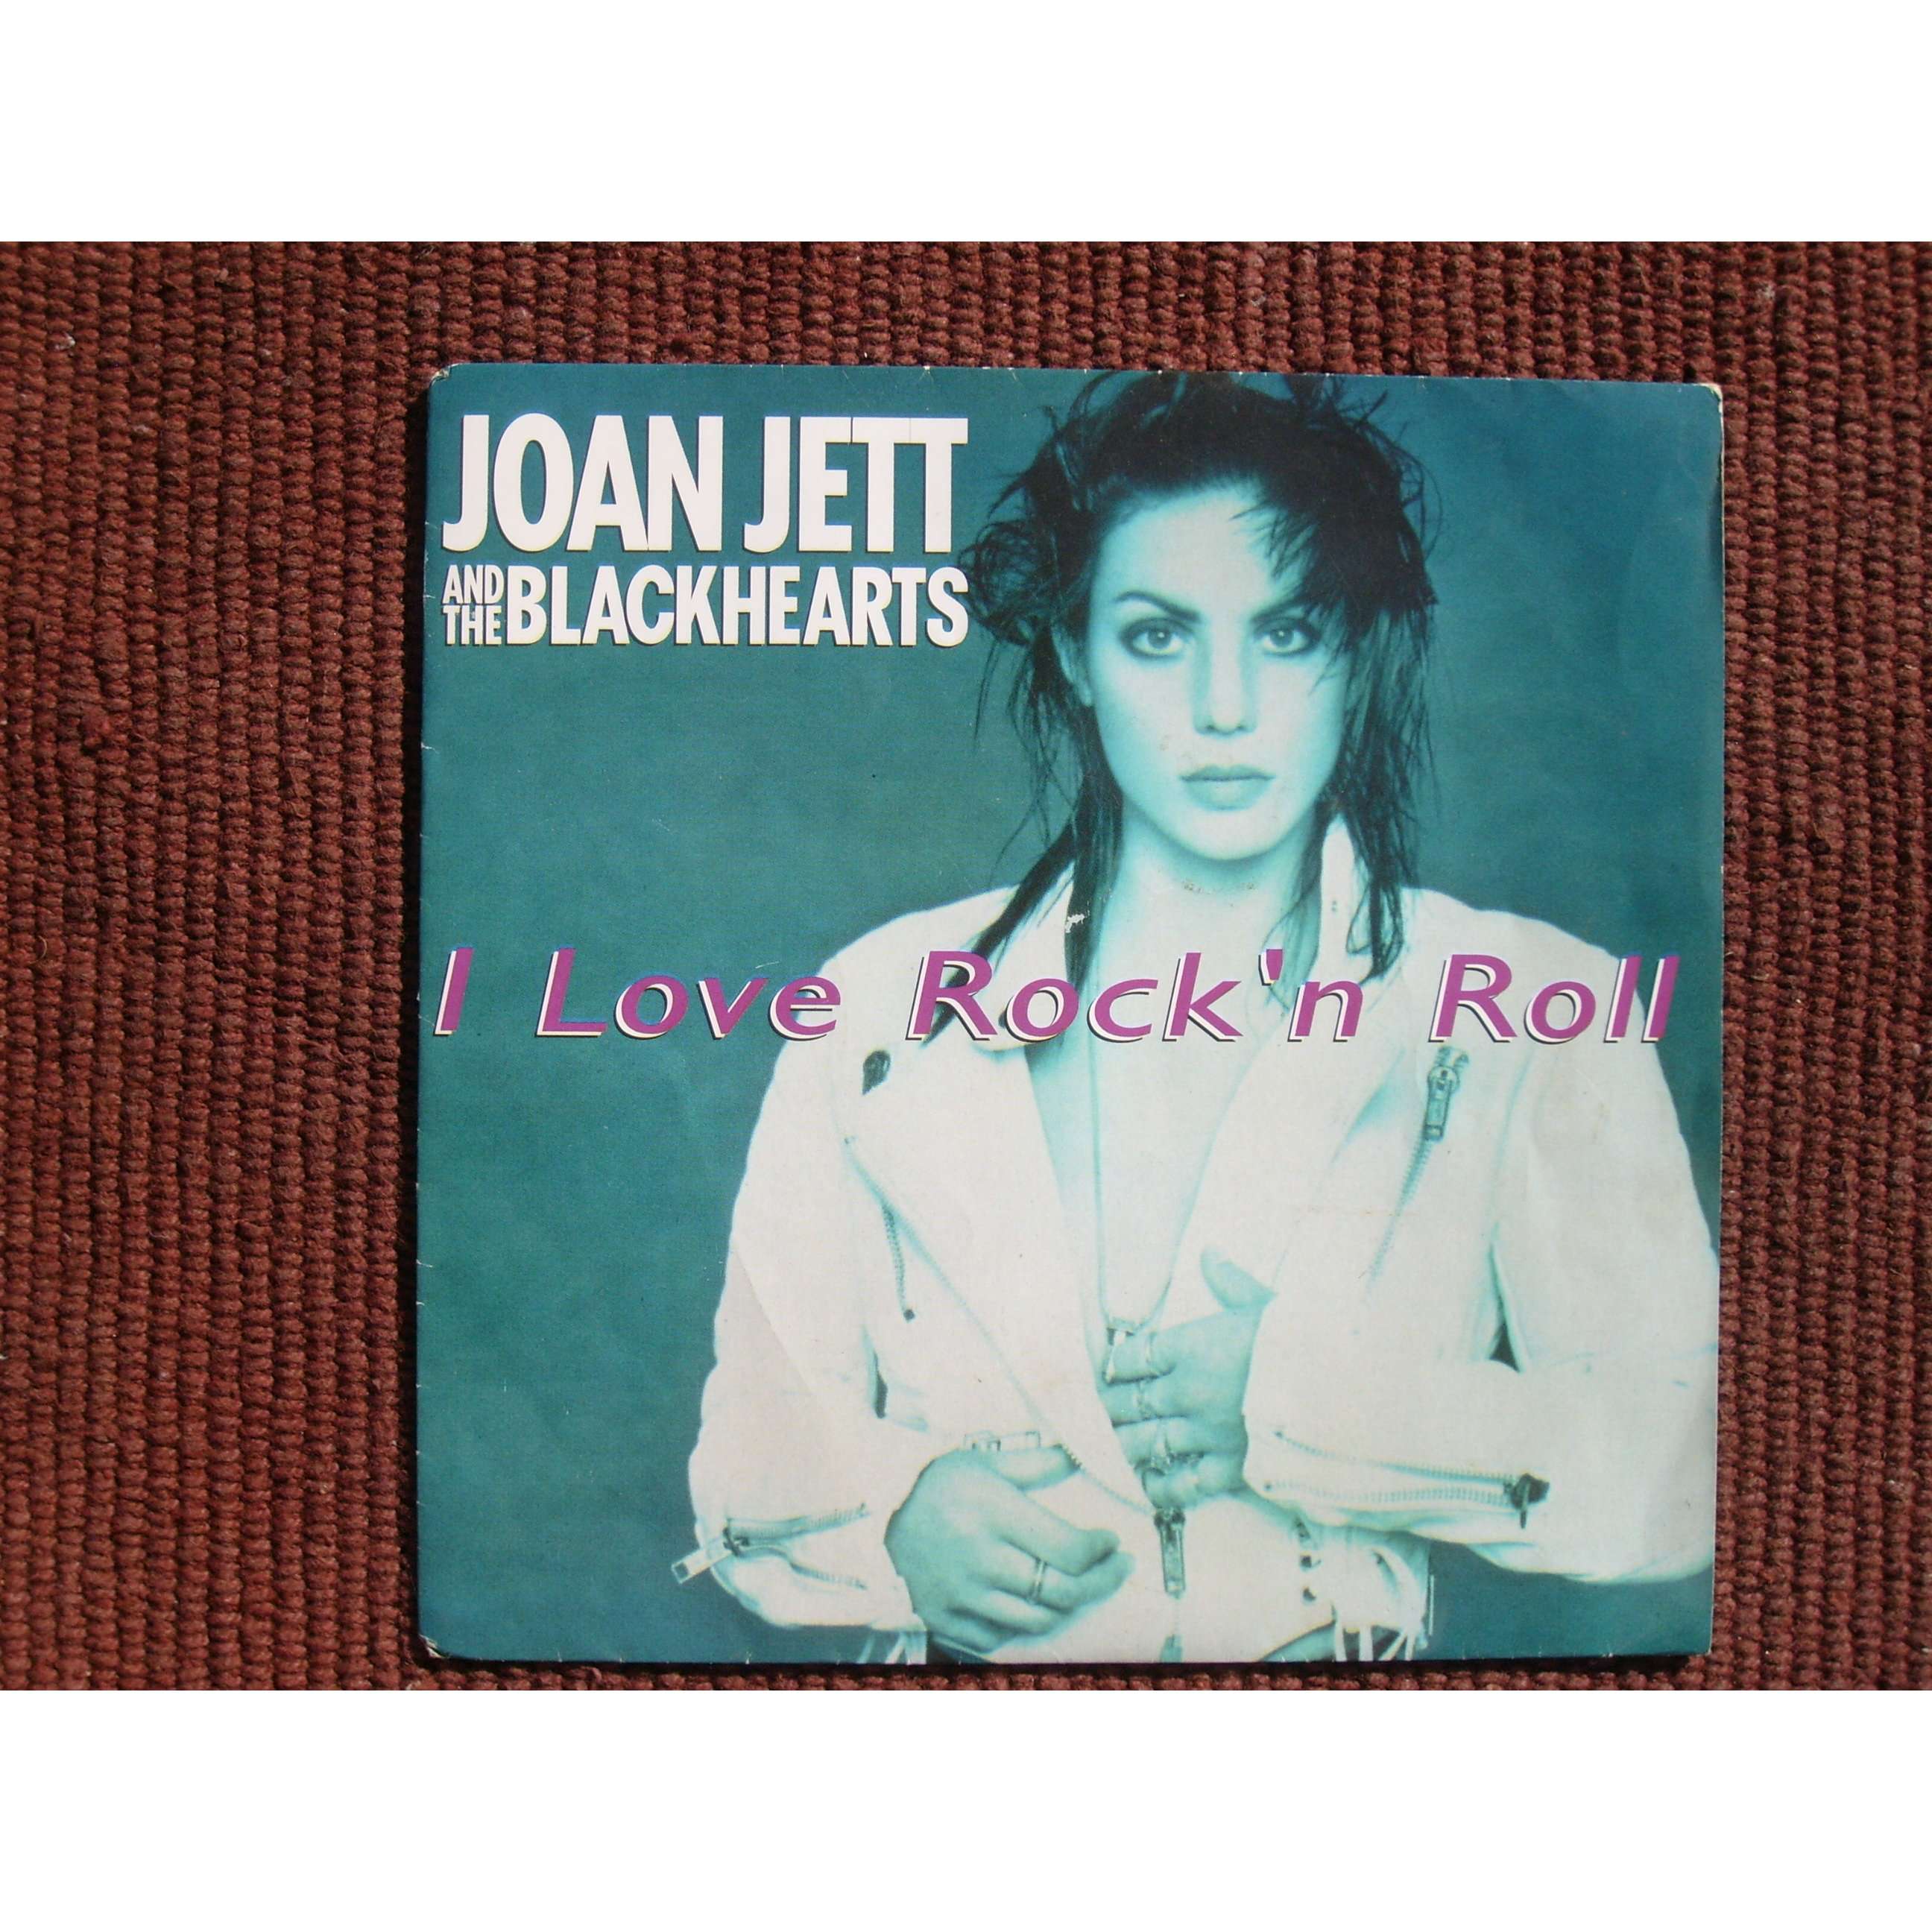 I love rock 'n roll - the french song by Joan Jett And The Blackhearts ...